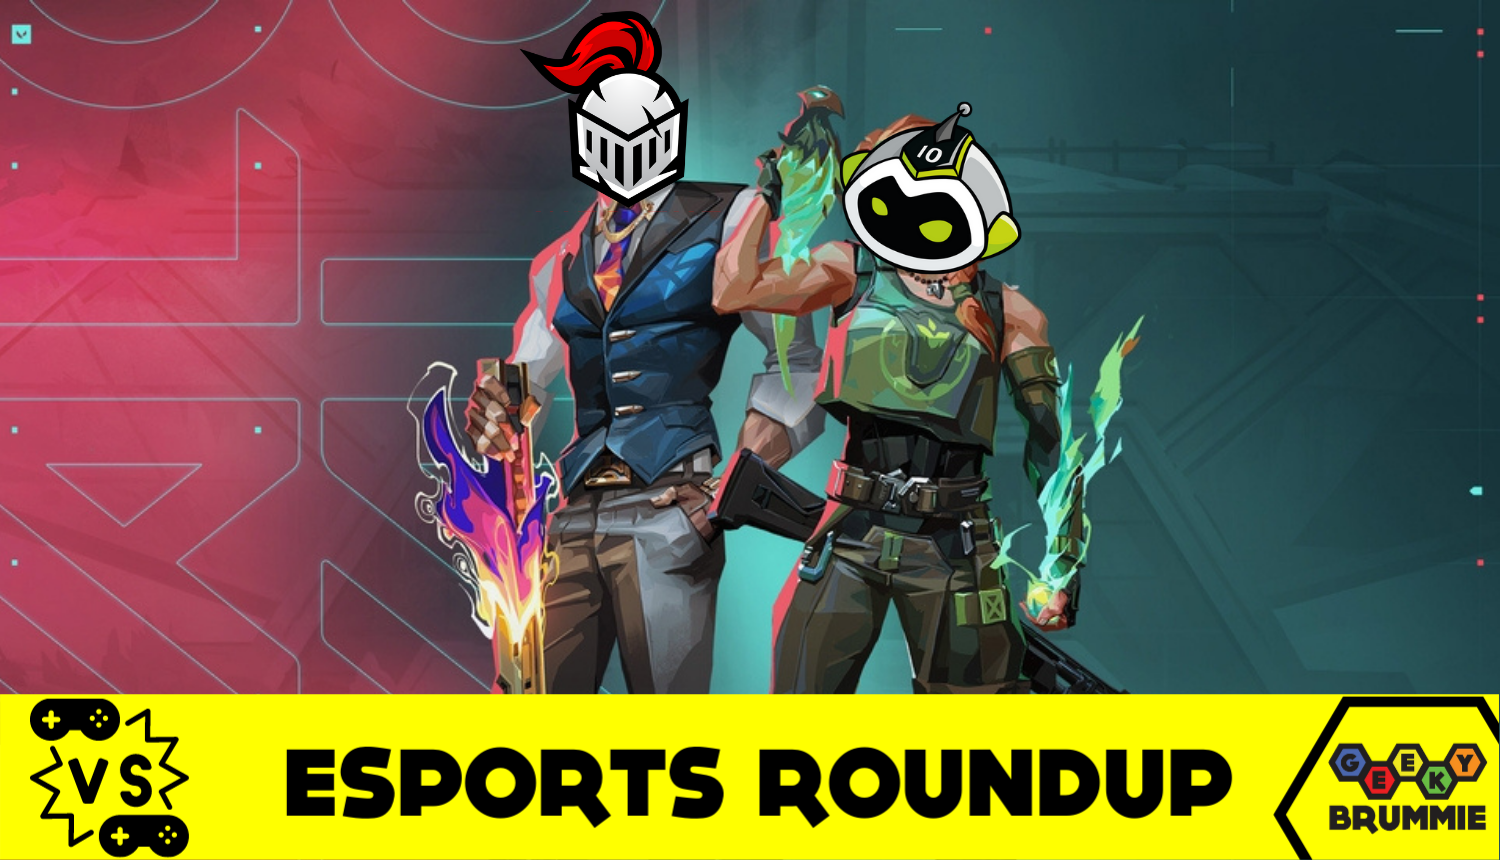 Esports Roundup: New Roster, New Tournaments, and New Horizons